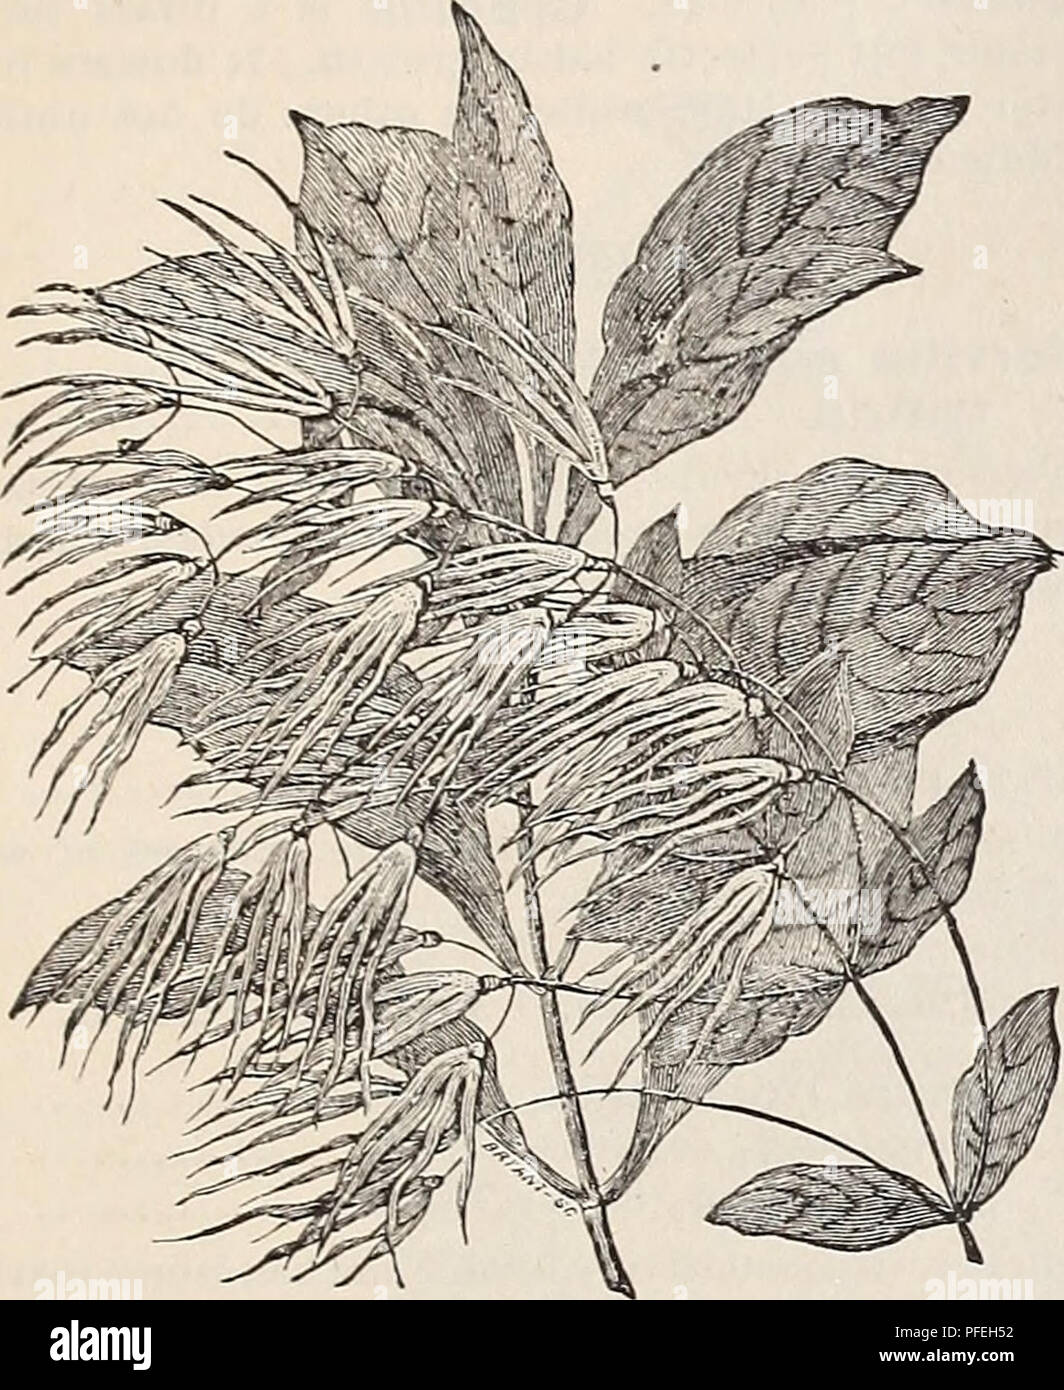 . Descriptive catalogue of trees, shrubs, vines and evergreens. Nurseries (Horticulture) Pennsylvania Catalogs; Trees Seedlings Catalogs; Ornamental shrubs Catalogs; Fruit Catalogs. MEEHANS' NURSERIES CBRASUS. CeraSUS pumila. A Dwarf Cerasus, with white flowers So CHIMONANTHUS. Chimonanthus prsecOX. a rare Chinese shrub, having the peculiarity of producing its purplish- yellow flowers the first few sunny days of winter. Of remarkably pleasing odor 50. Chionaathus Virginica. (White Fringe.) CHIONANTHUS. White Fringe. Chionanthus maritima 50 &quot; Virginica (see cut) 50 One of the most ornament Stock Photo